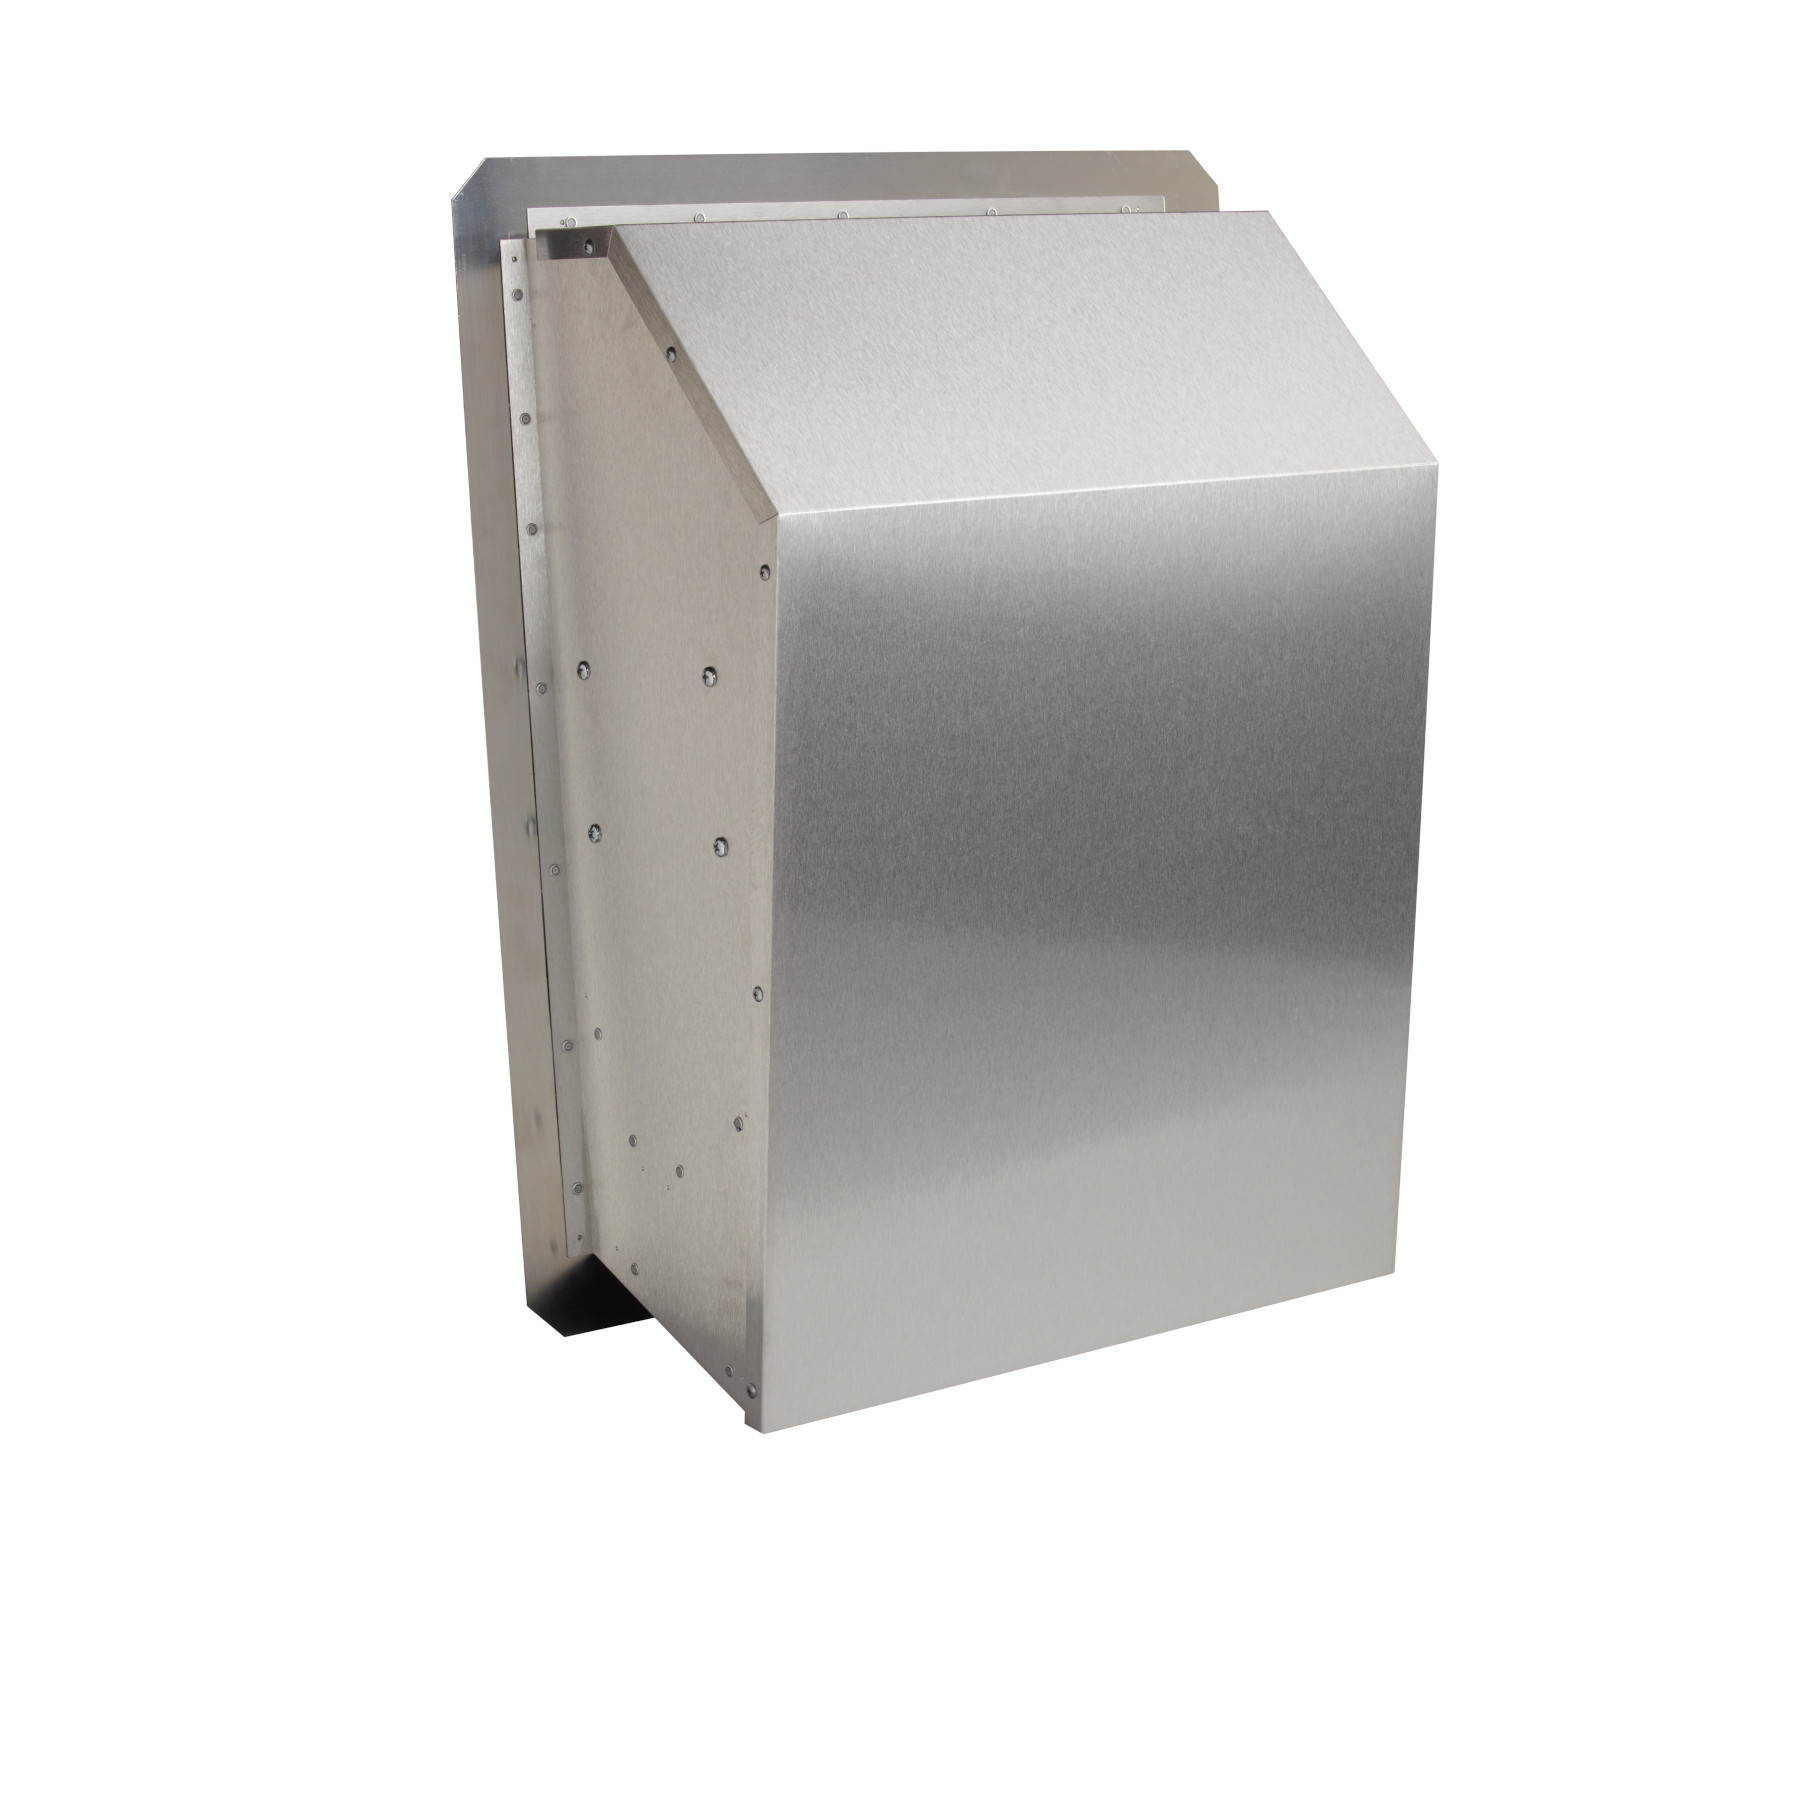 **DISCONTINUED** 1280 Max External Blower CFM, for use with Select Broan® Range Hoods